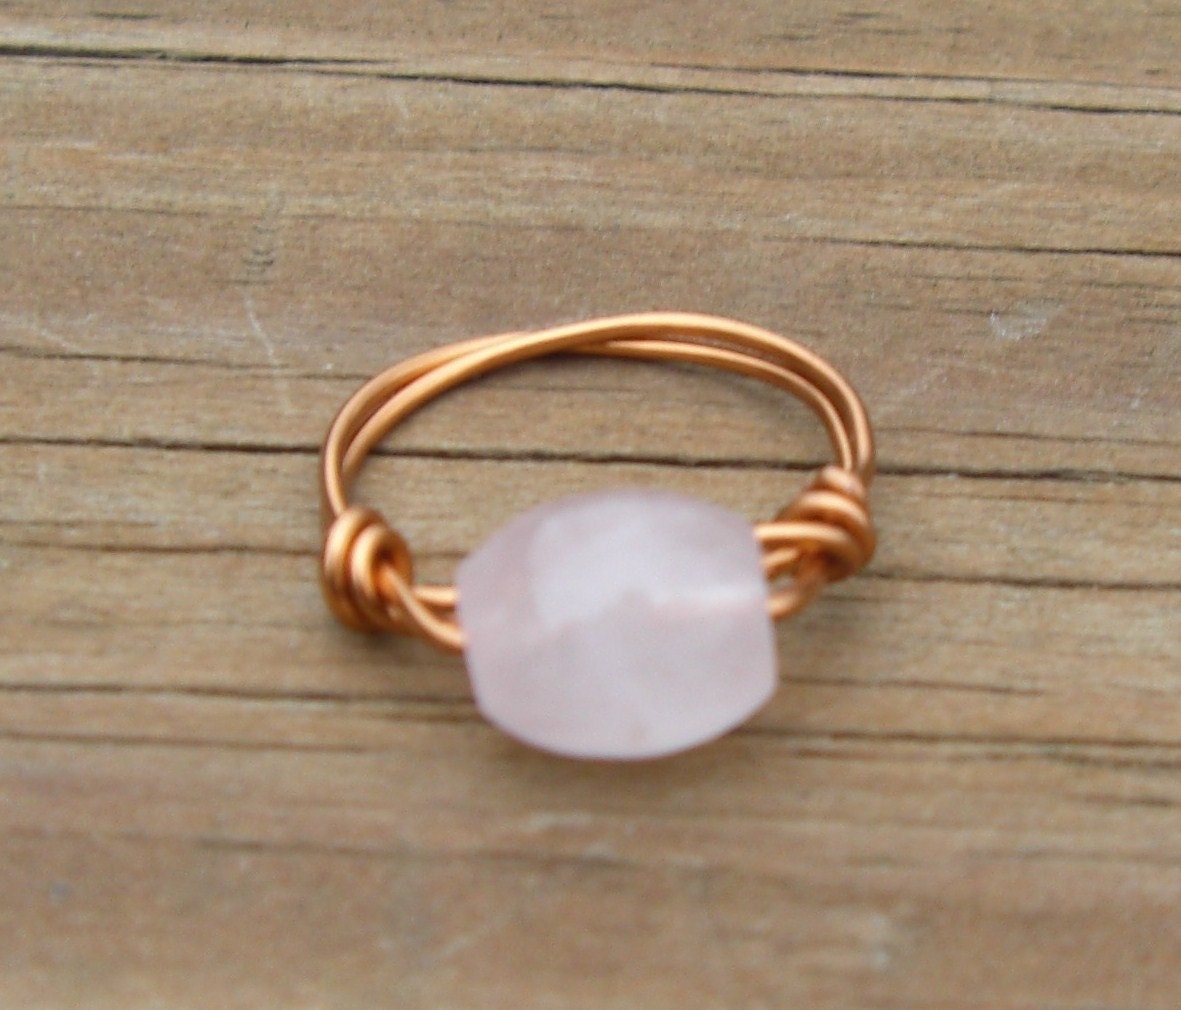 Mother's Gemstong Ring. A modern twist on a Mother's Ring.